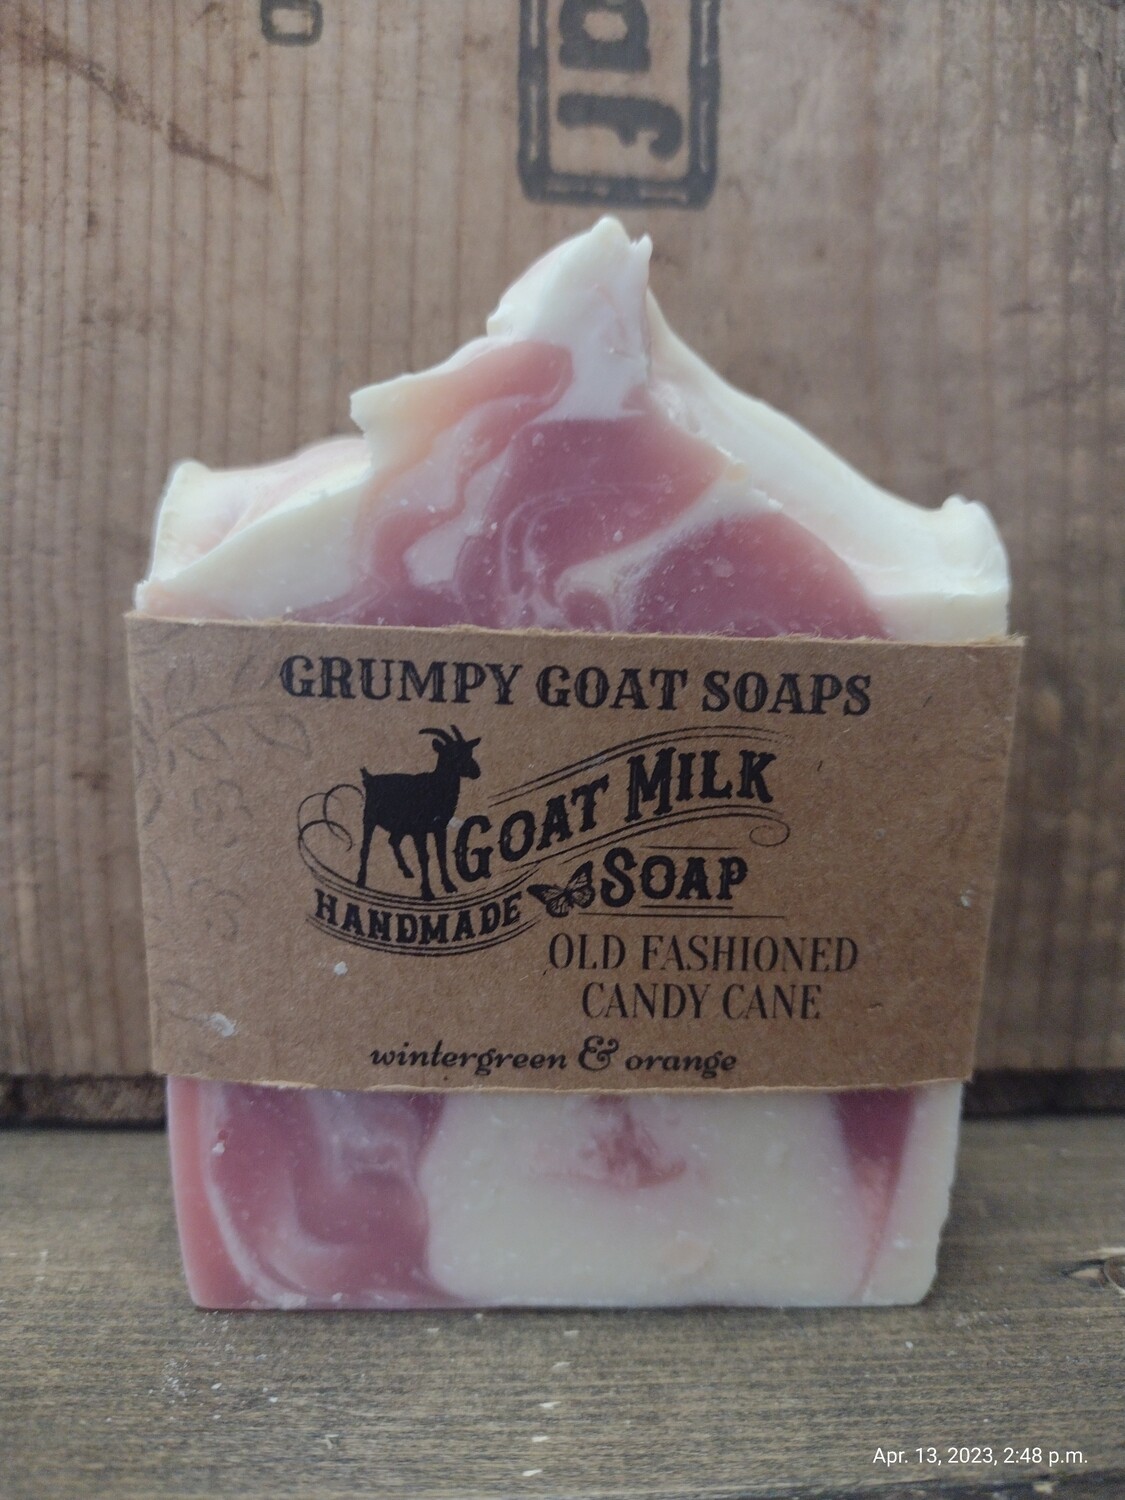 Old Fashioned Candy Cane Goat Milk Soap